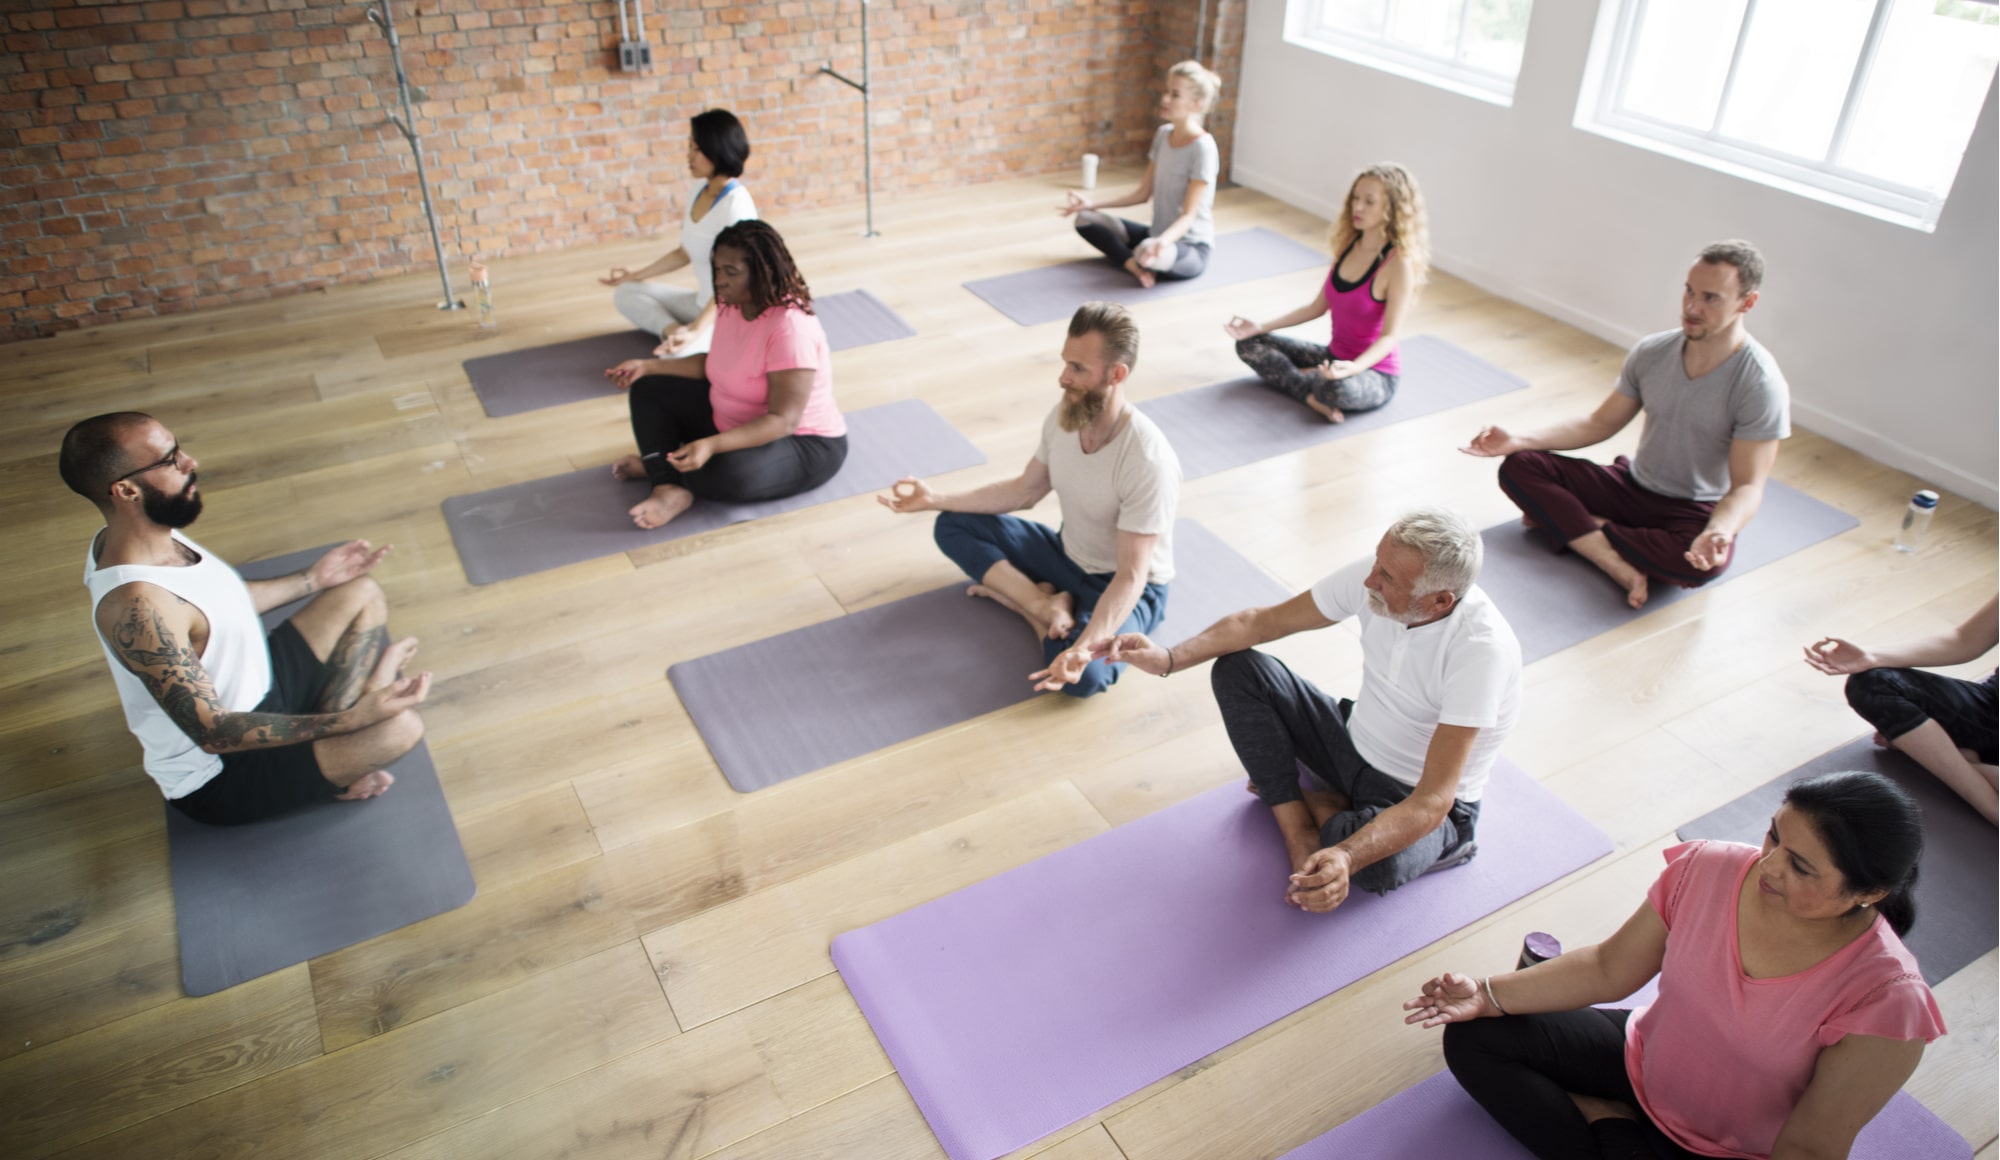 The Amazing Benefits of Yoga for Depression and Anxiety Pathfinders - A group of individuals in recovery are practicing yoga for depression and anxiety, as well as meditation techniques from a professional yoga instructor to help with implementing healthy coping mechanisms, avoid relapse, and build a support system with the individuals in the yoga class.